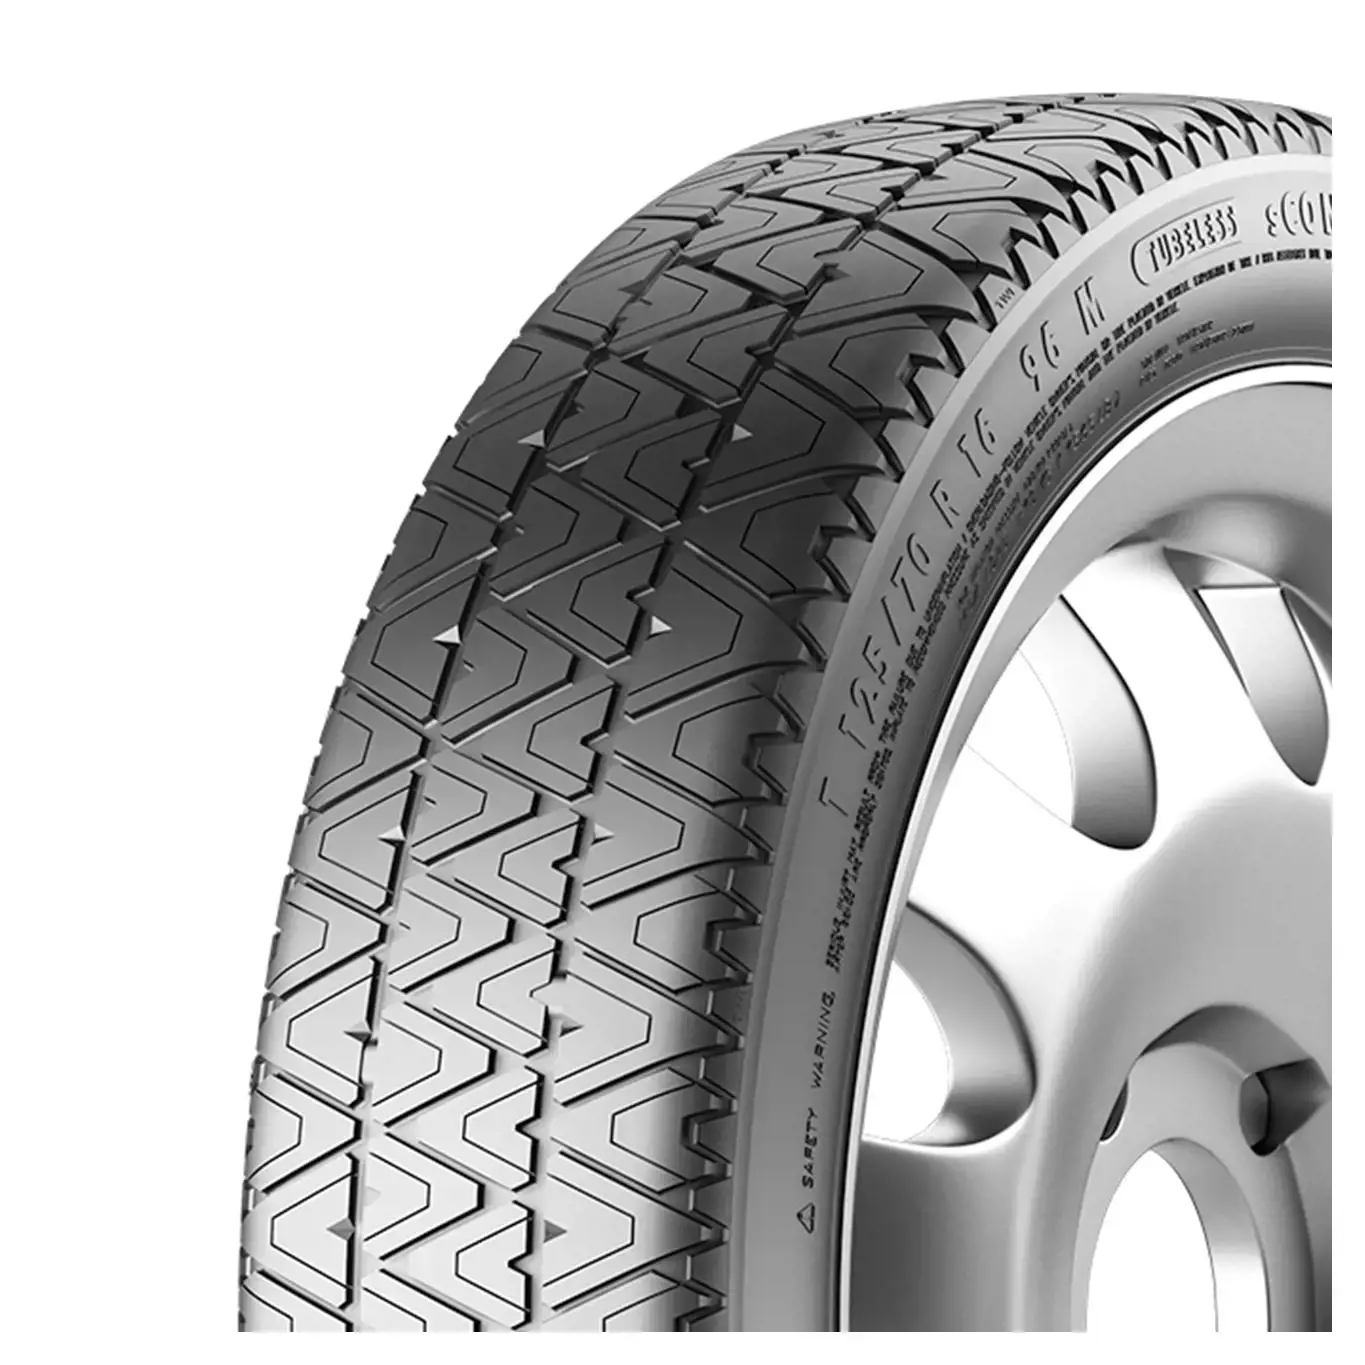 T125/70 R18 99M sContact